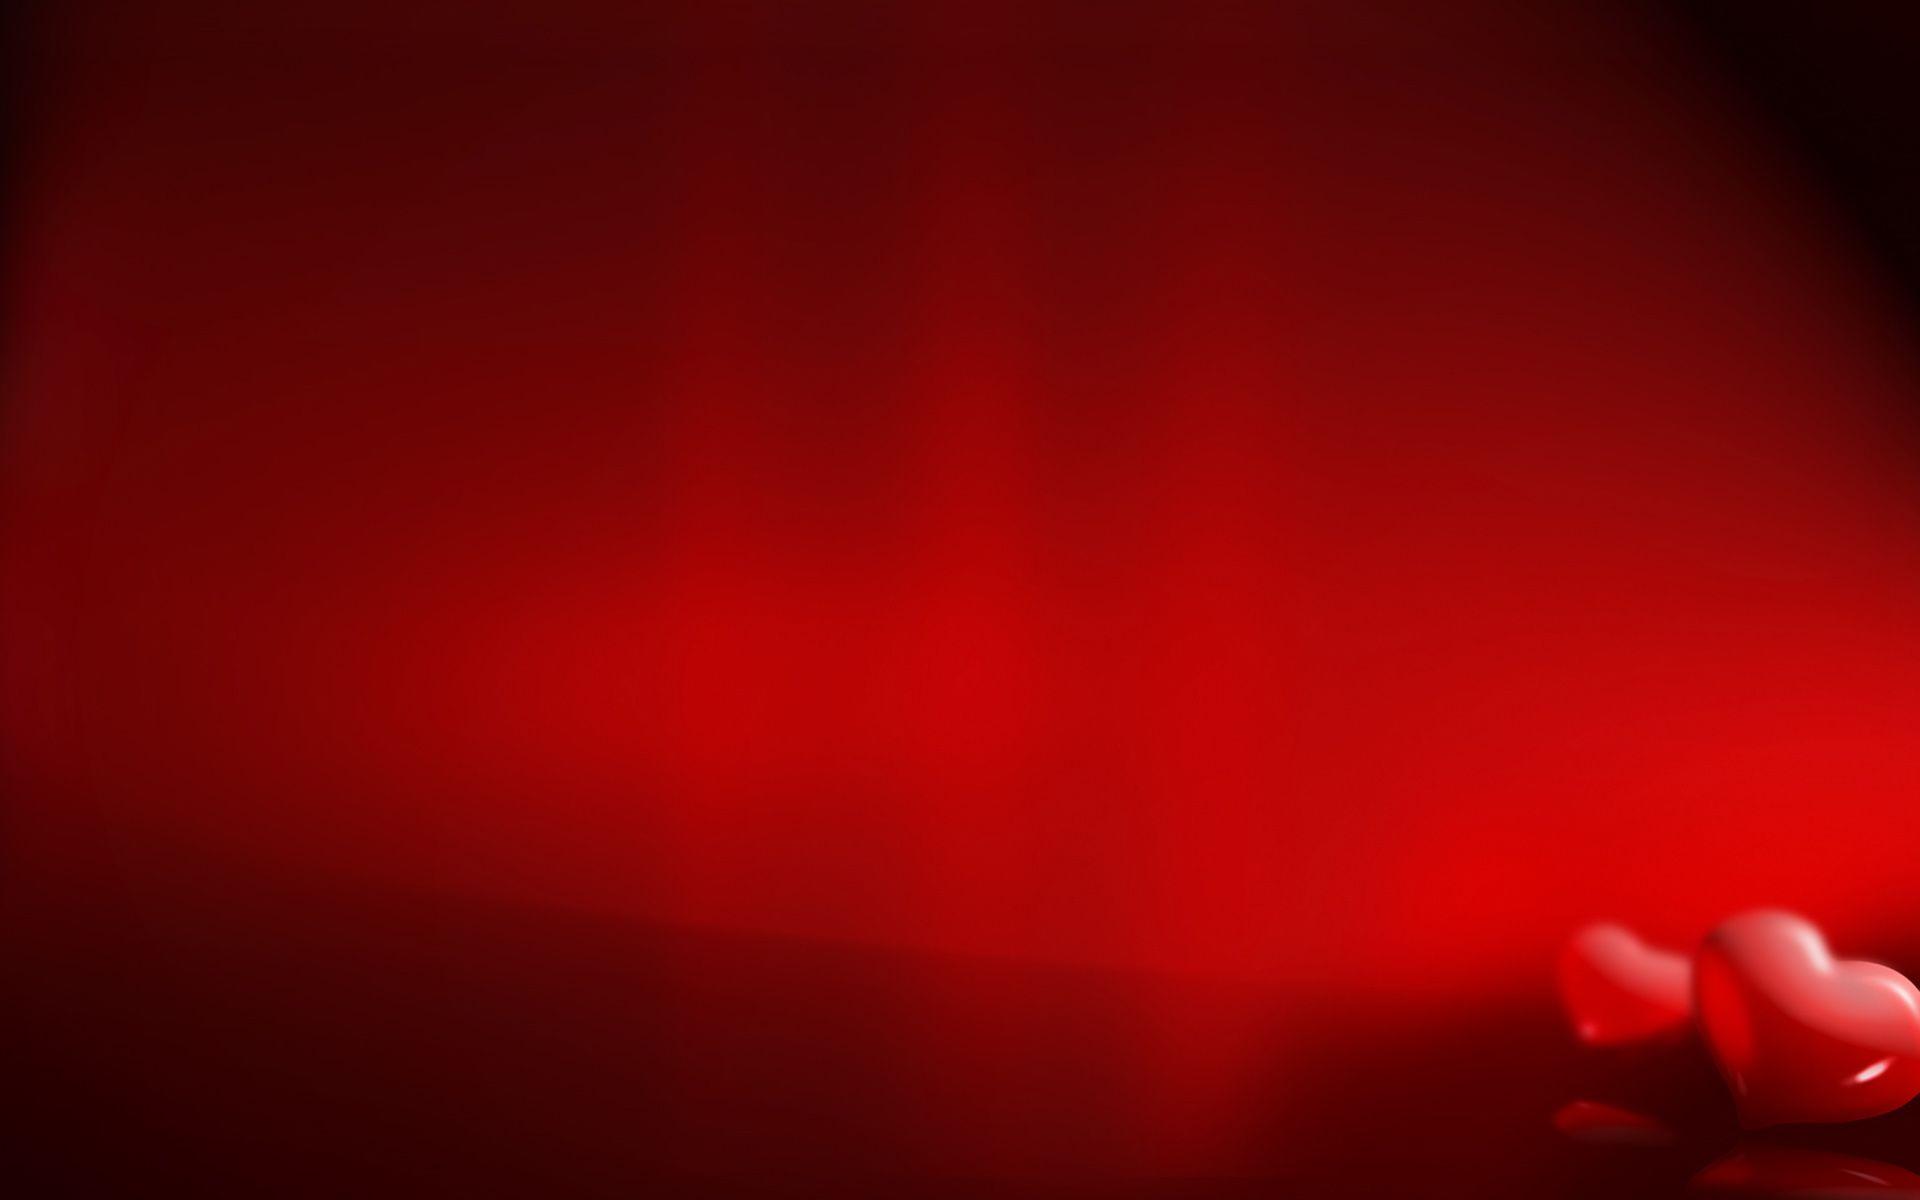 Abstract Red Background Wallpaper Free Wallpaper 1920x1200PX